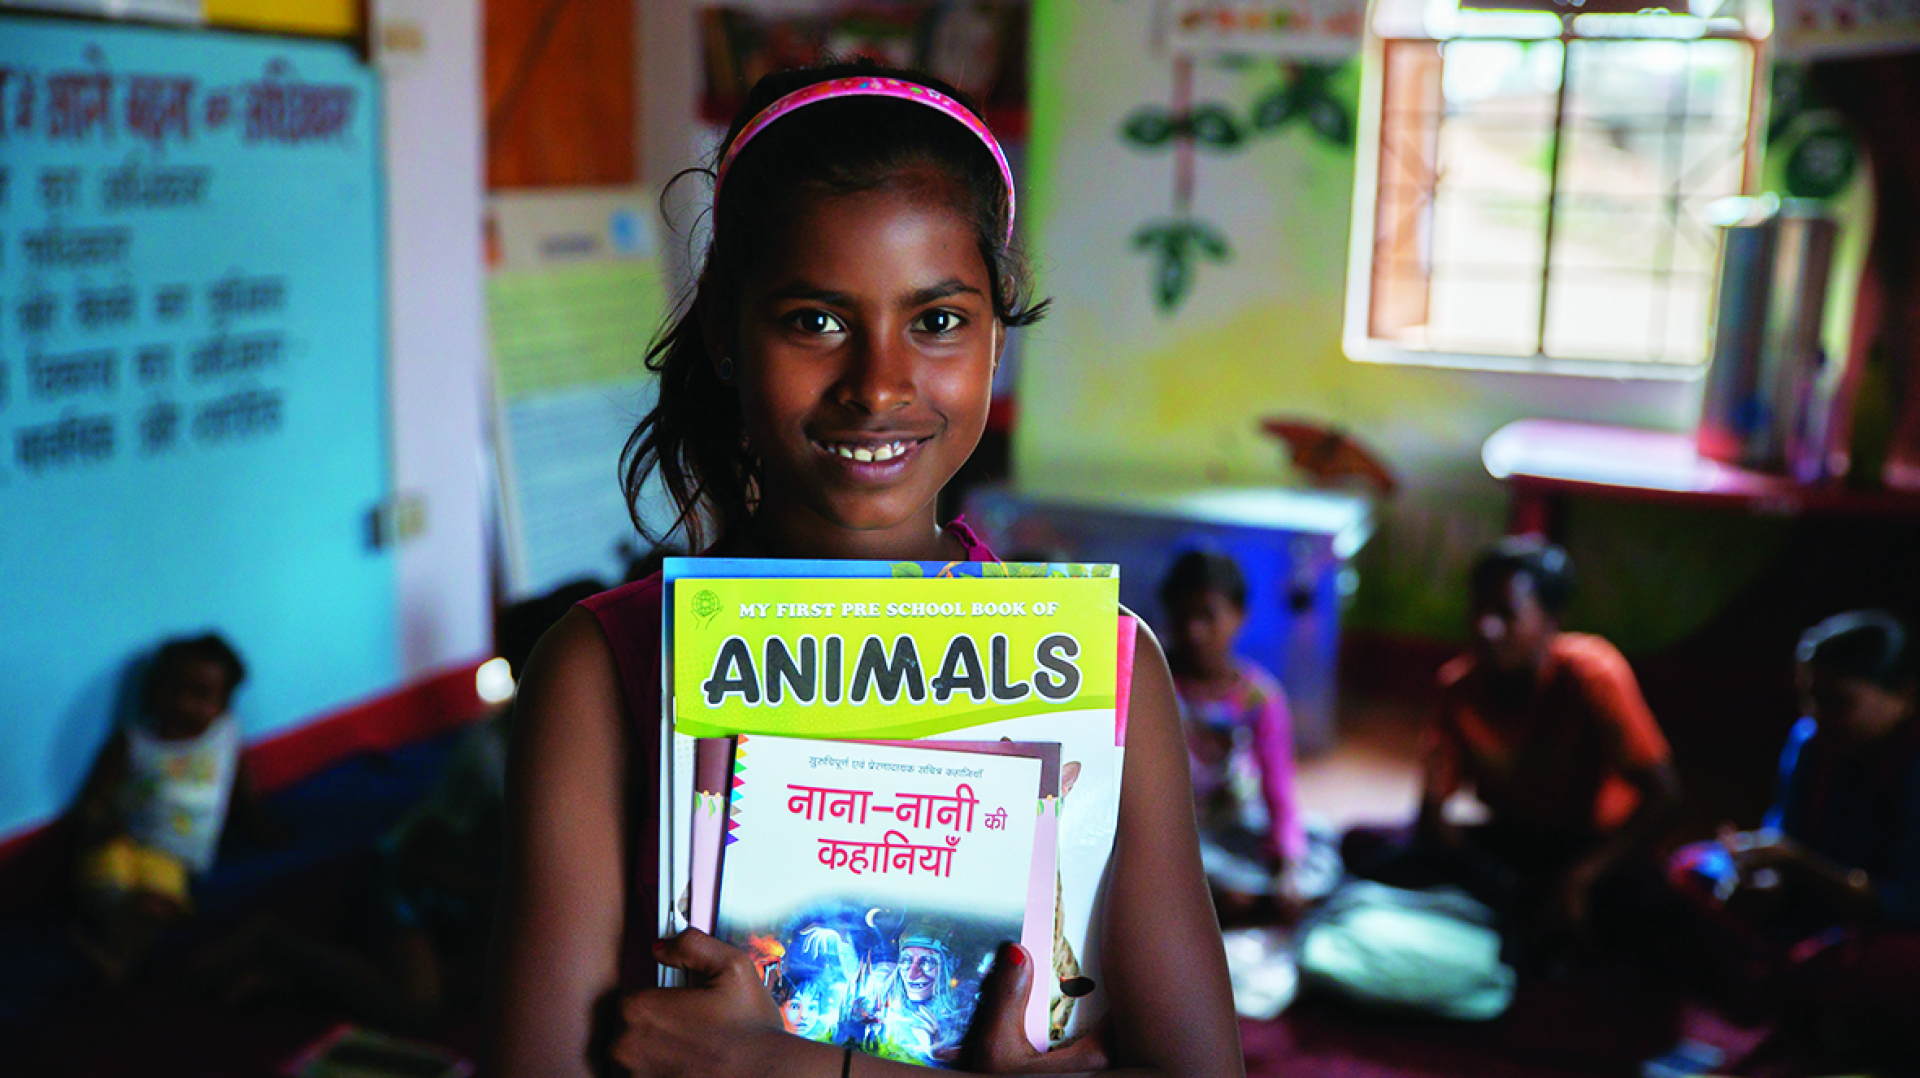 A young Indian girl stands in front of her classmates in the schoolroom, clutching her books and smiling at the camera